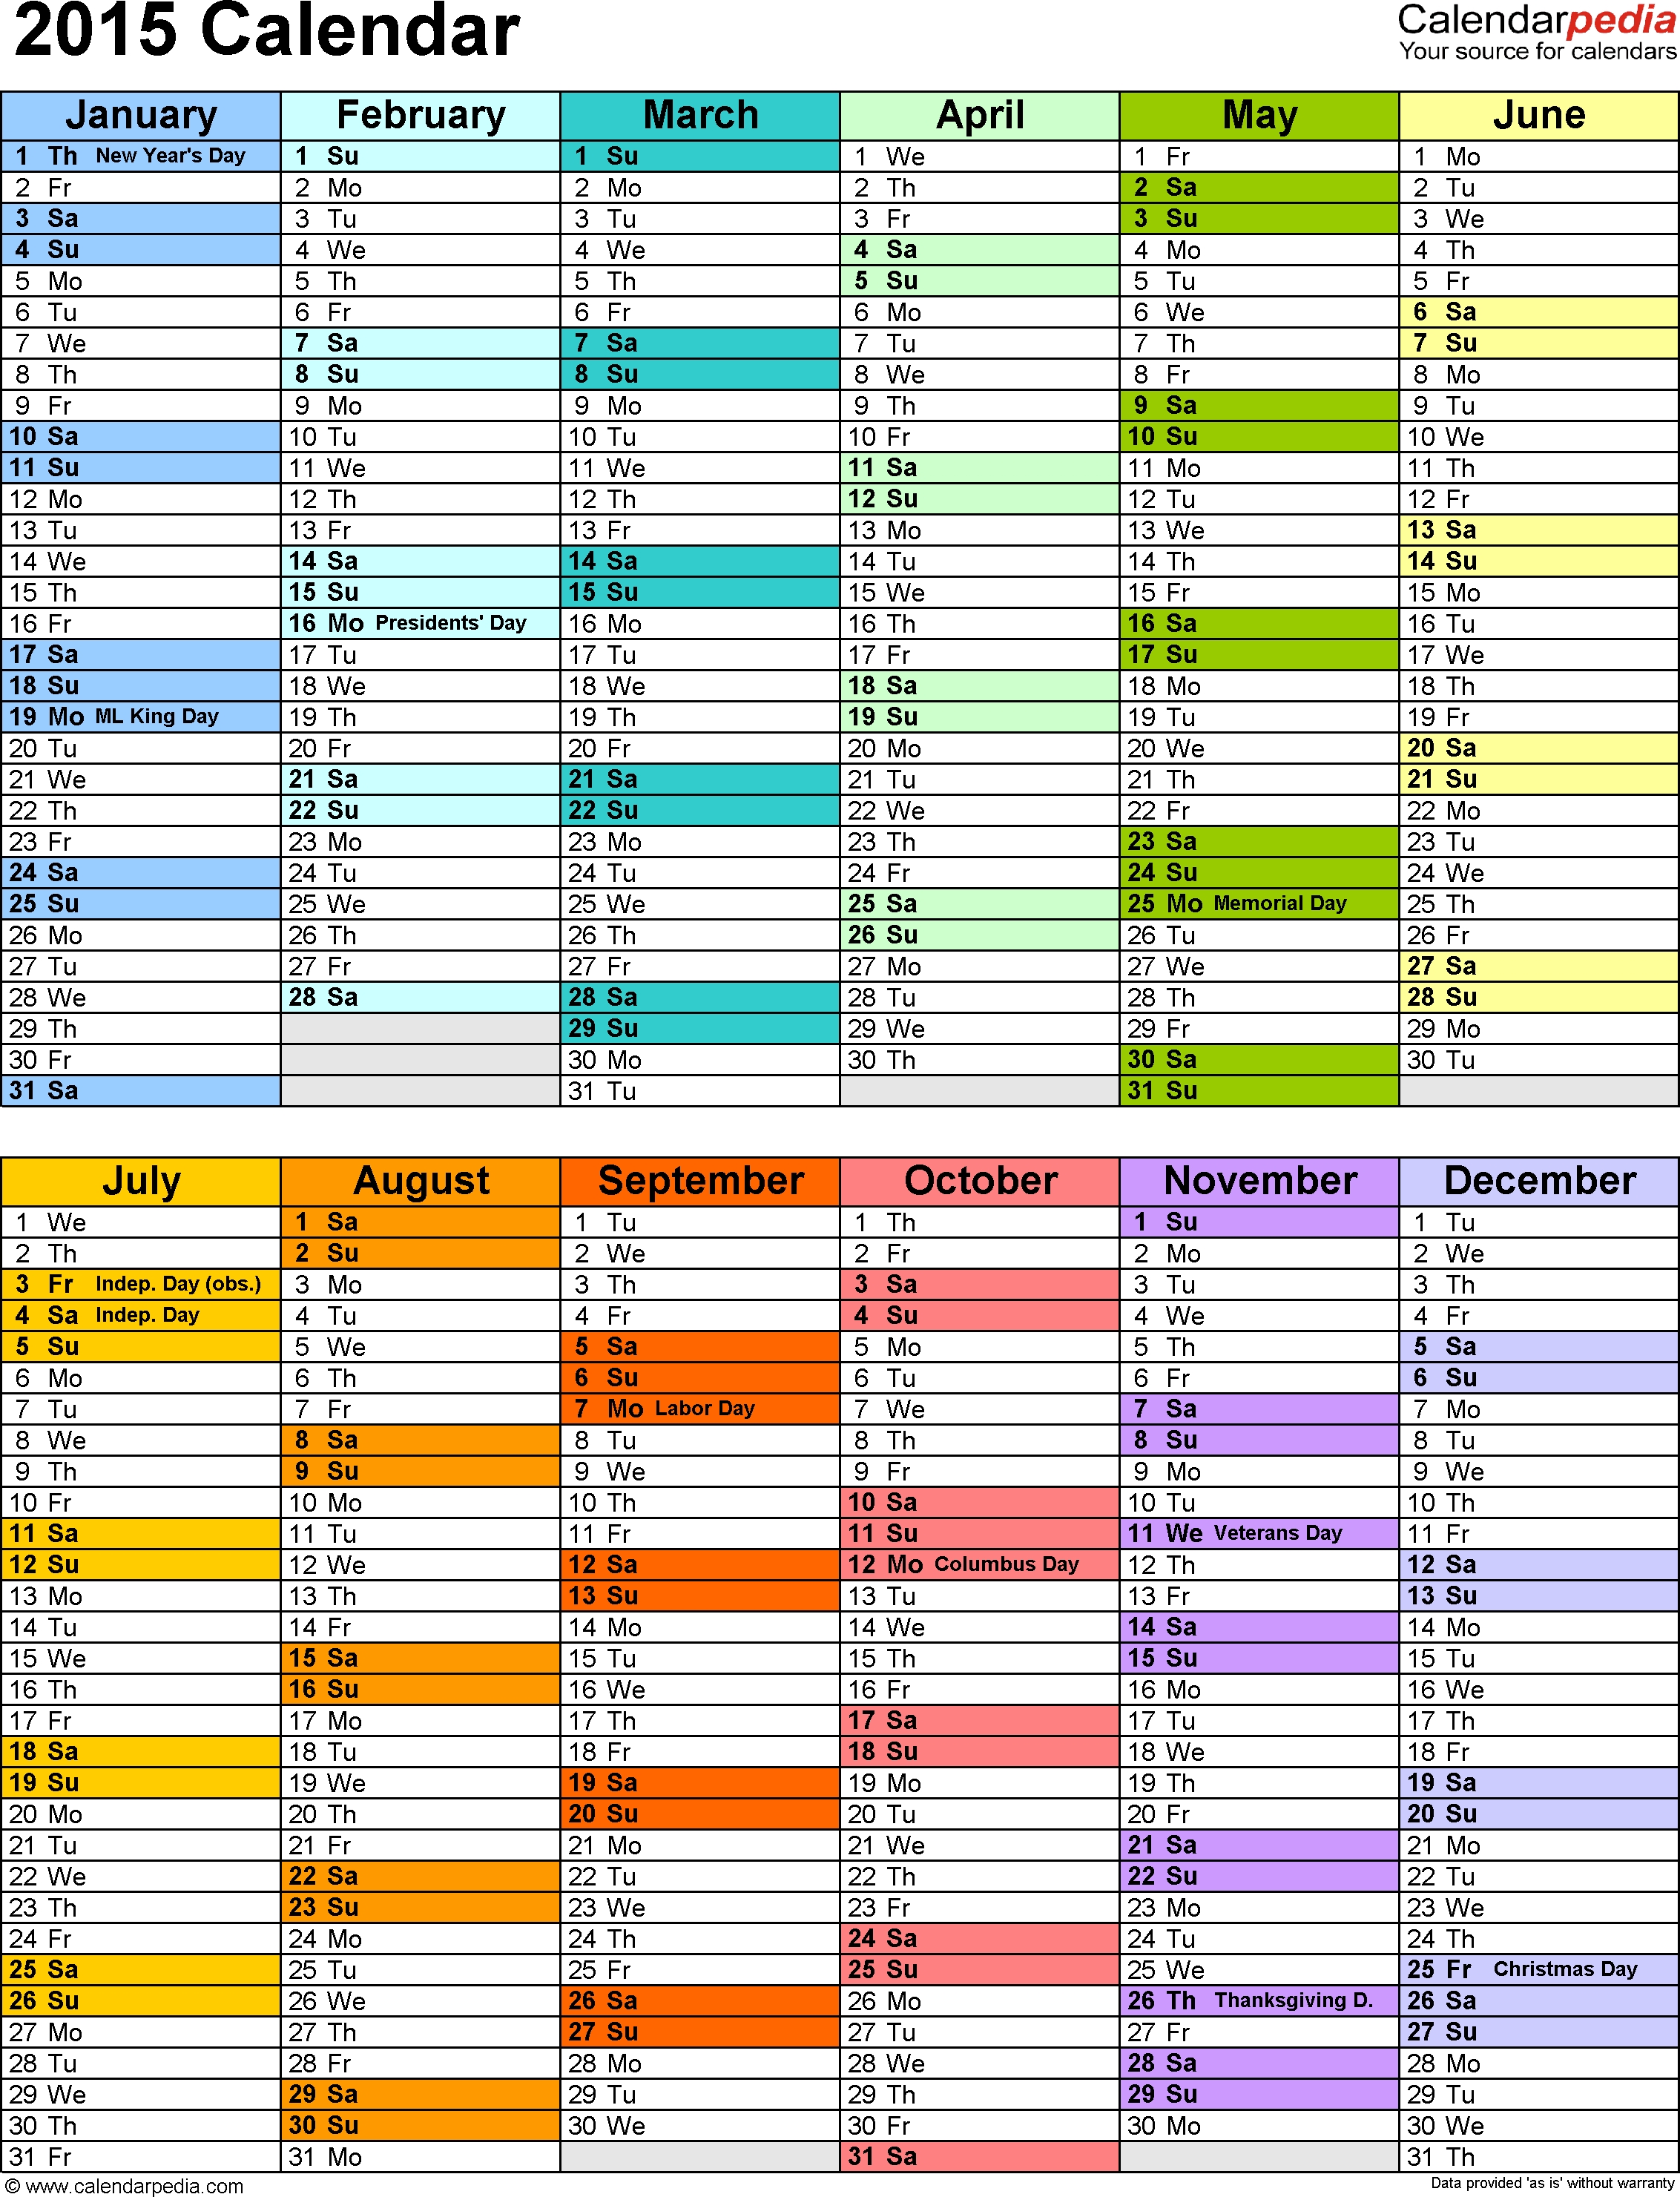 2015 Calendar Excel - Download 16 Free Printable Templates (.xlsx) with 12 Month Training Calendar Template